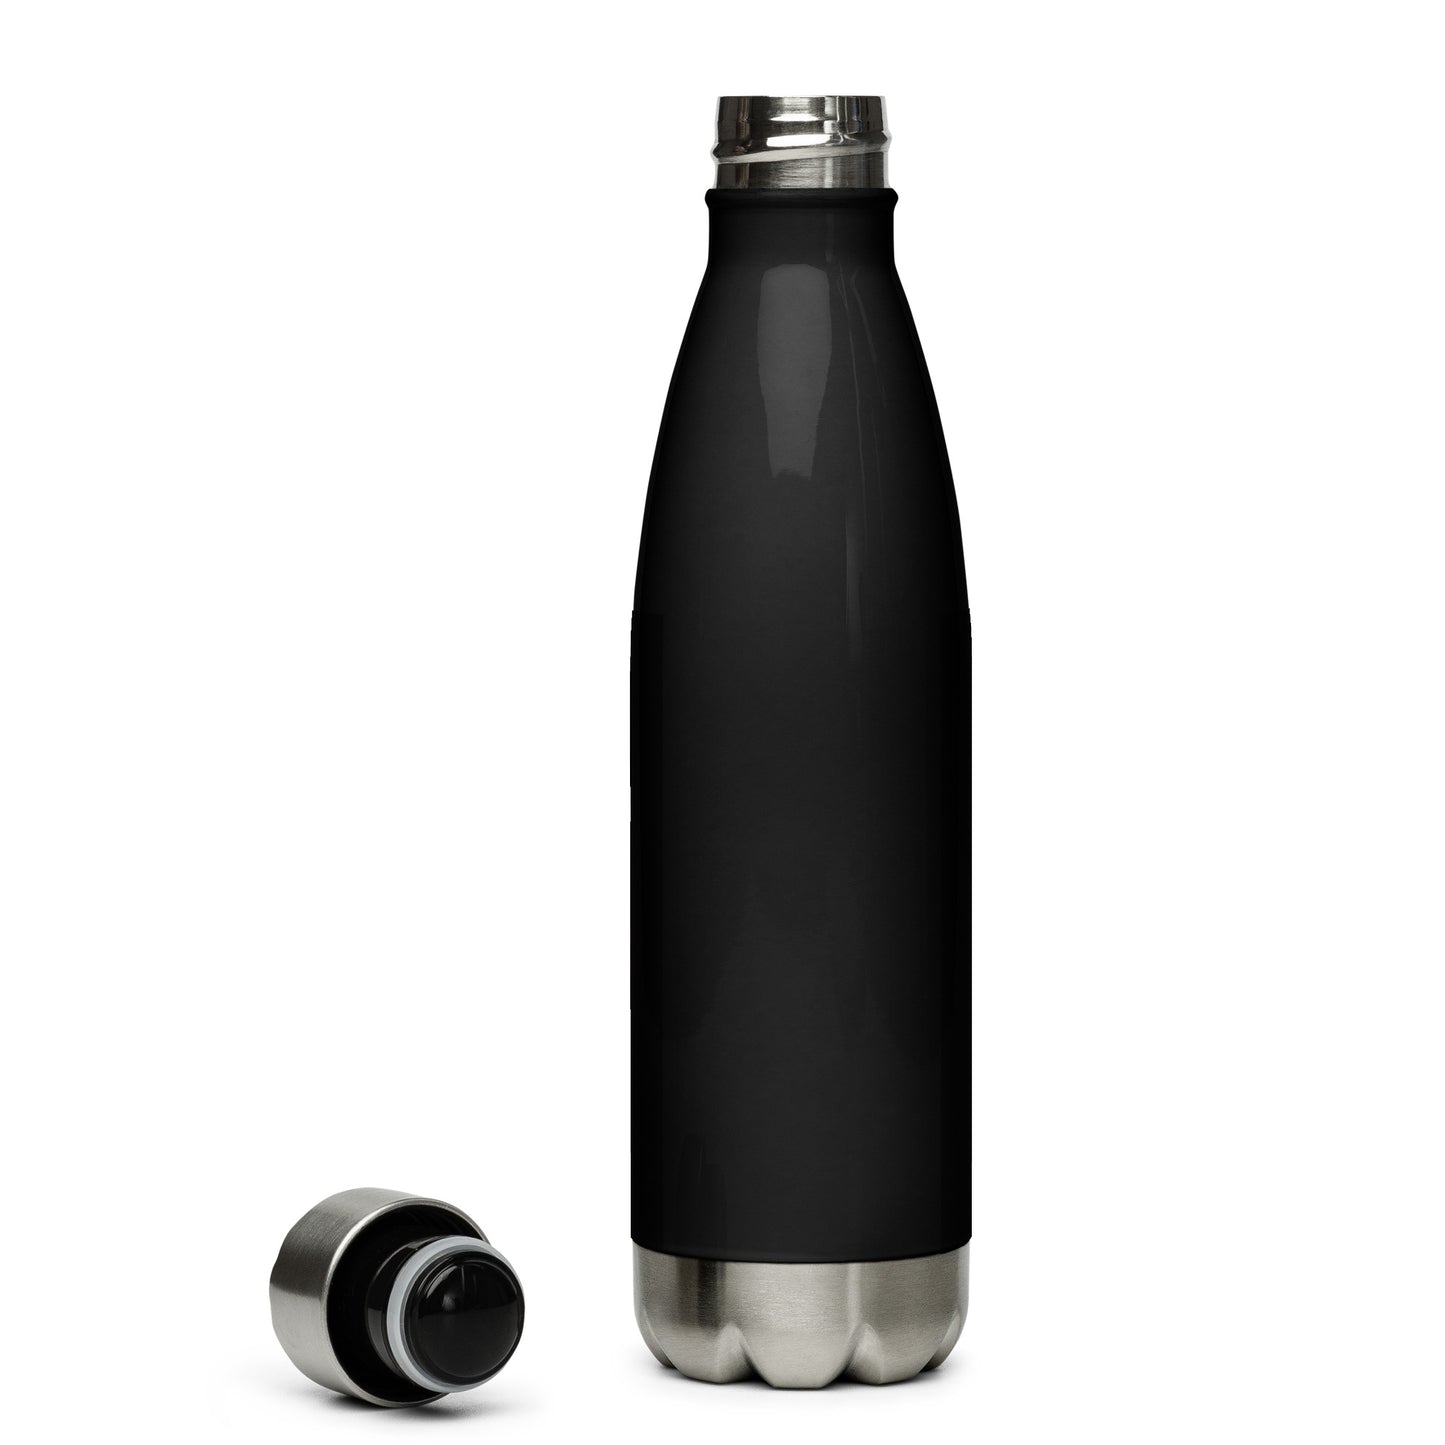 Santana Graphic - Stainless Steel Water Bottle